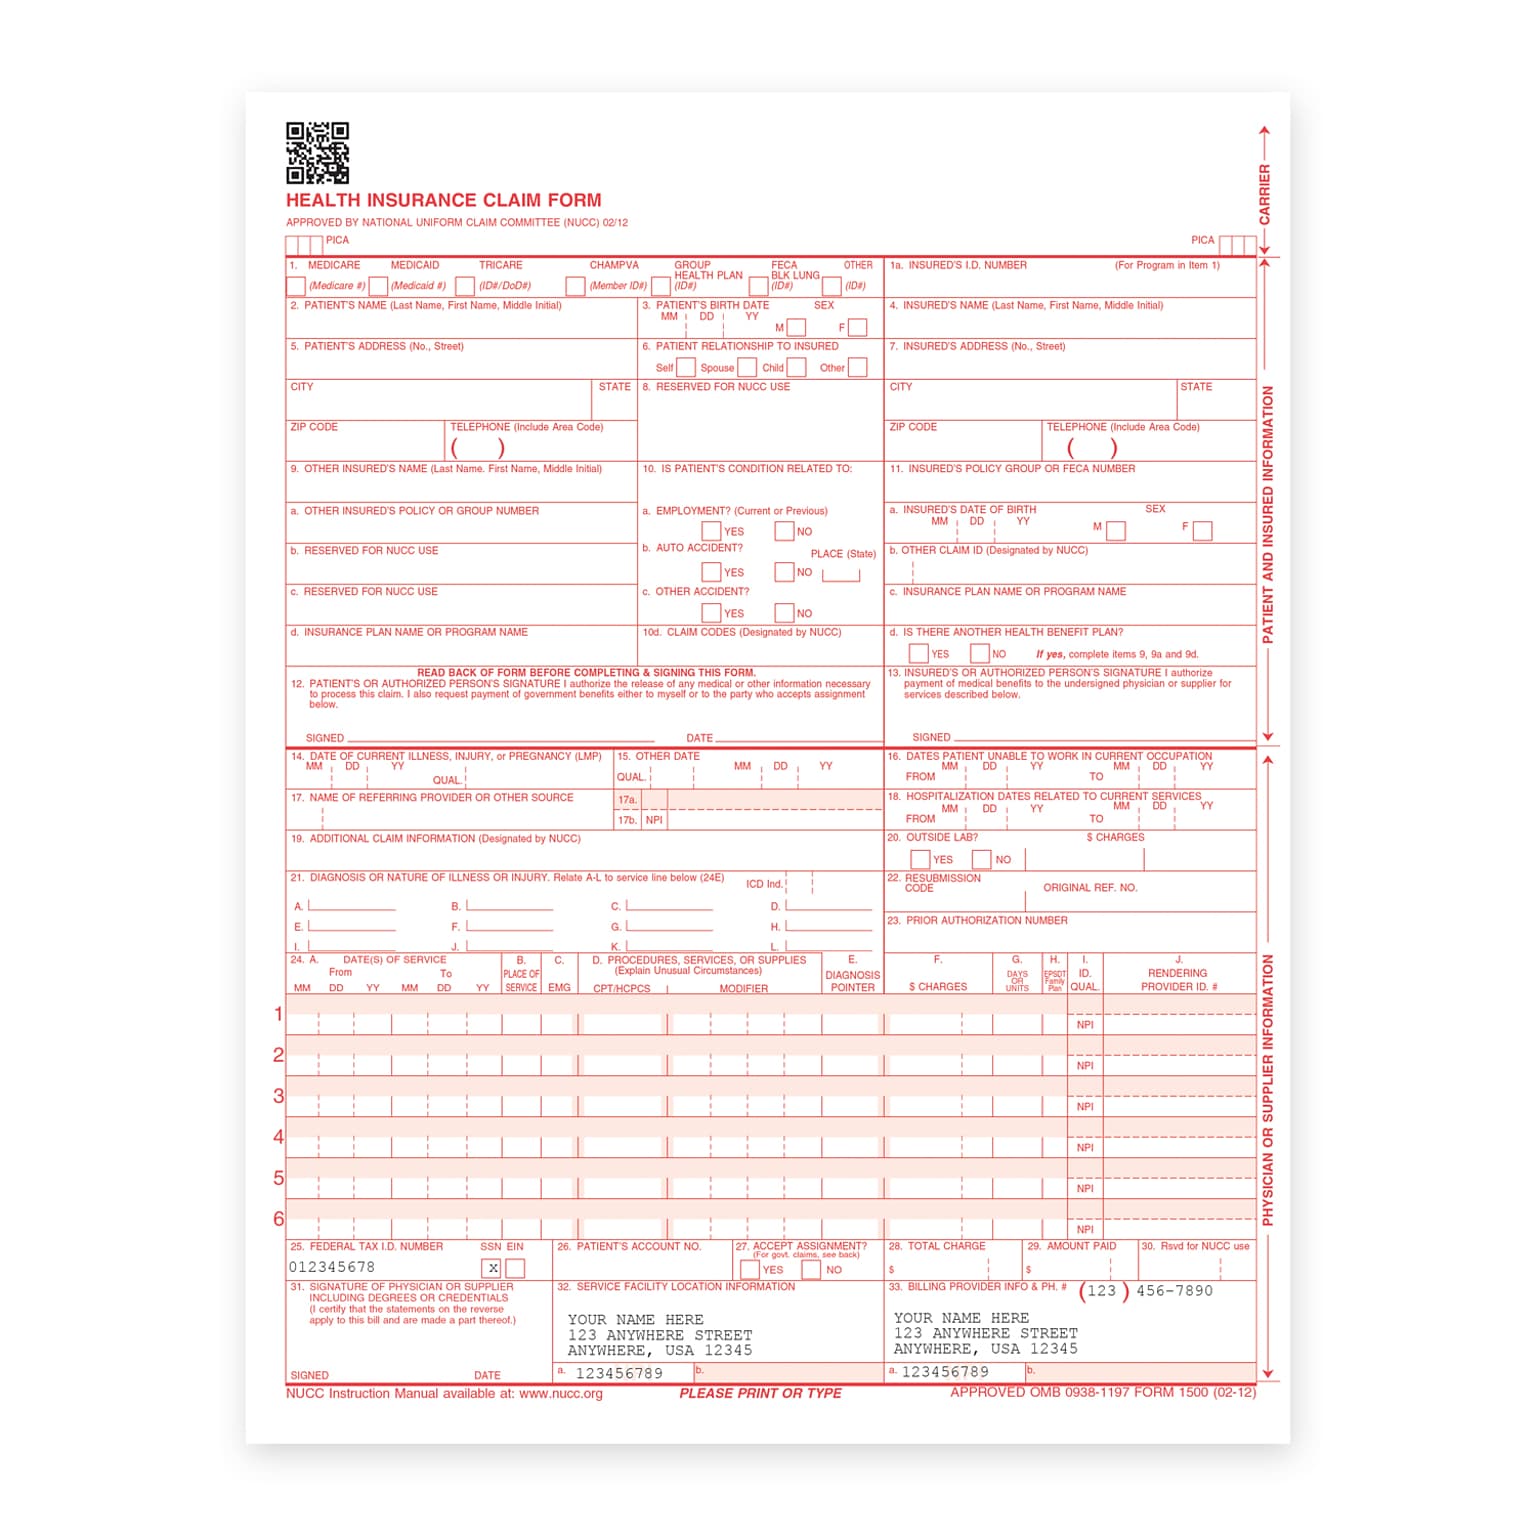 Custom Carbonless CMS Forms, 8-1/2 x 11, 100 Sheets per Pad